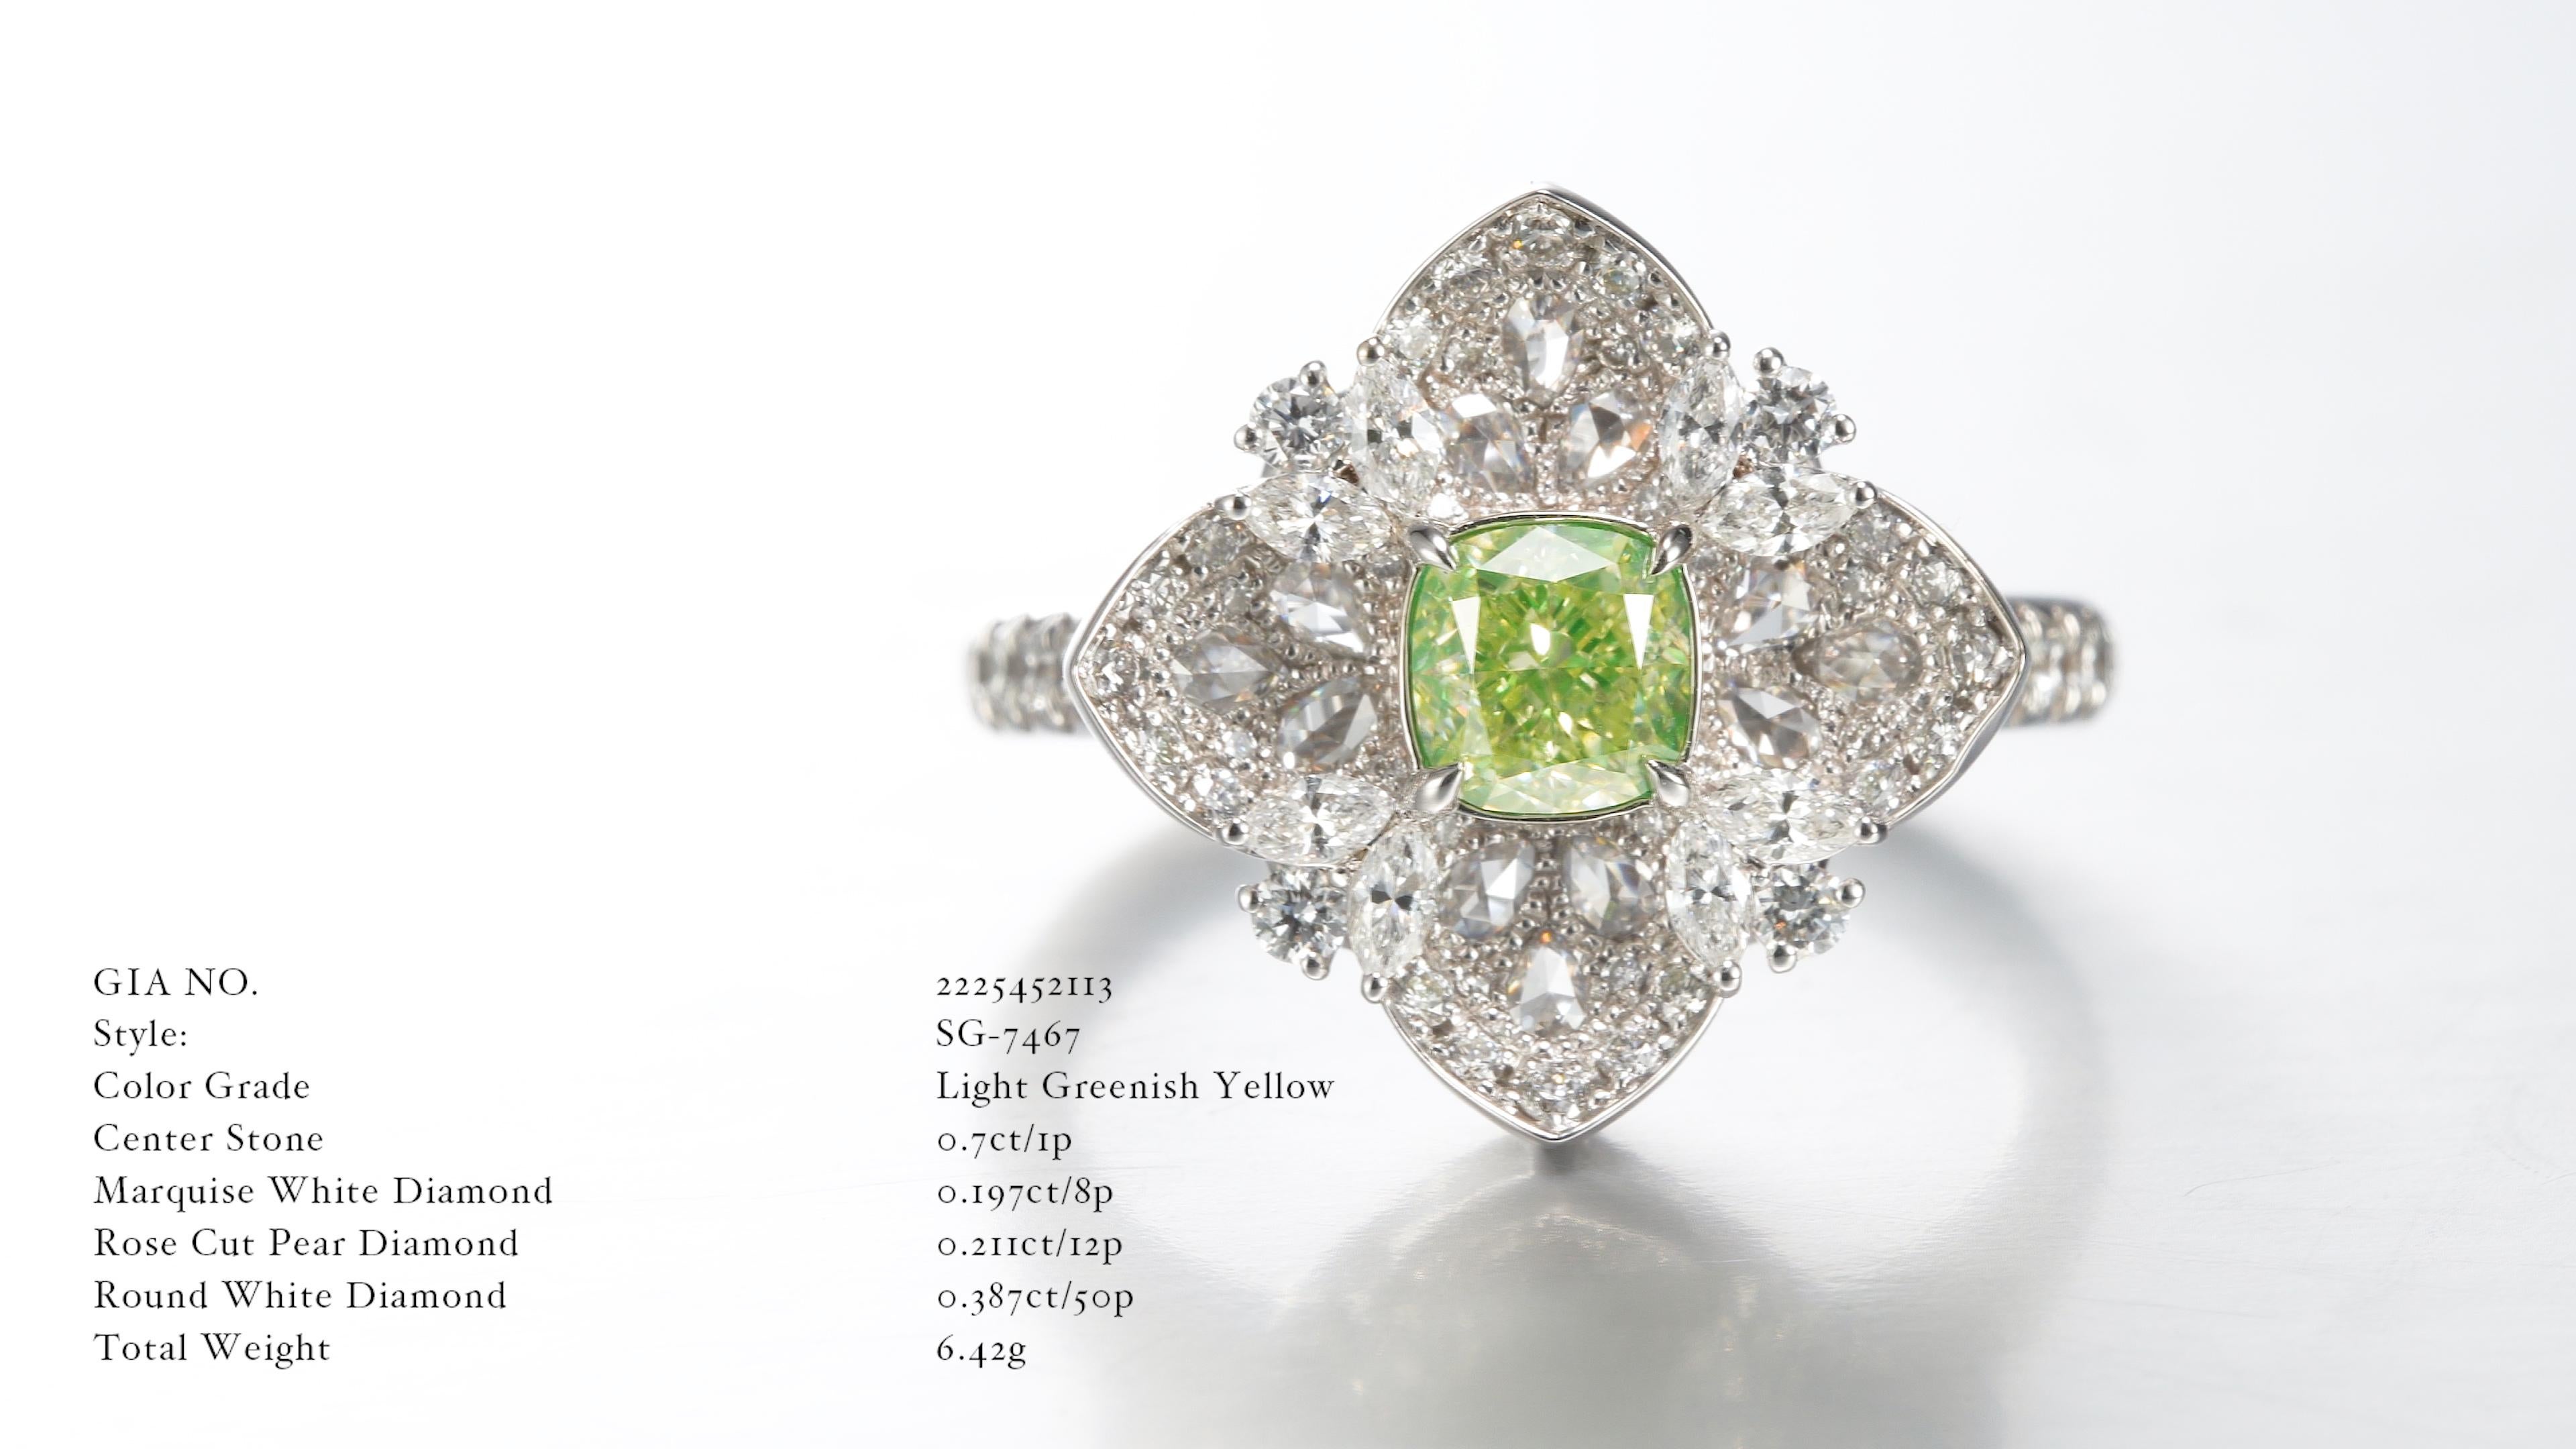 GIA Certified 0.70ct Natural Fancy Light Greenish Yellow Cushion Shape Diamond takes center stage in this exquisite creation. This enchanting diamond, certified by the Gemological Institute of America (GIA), possesses a rare and captivating hue that